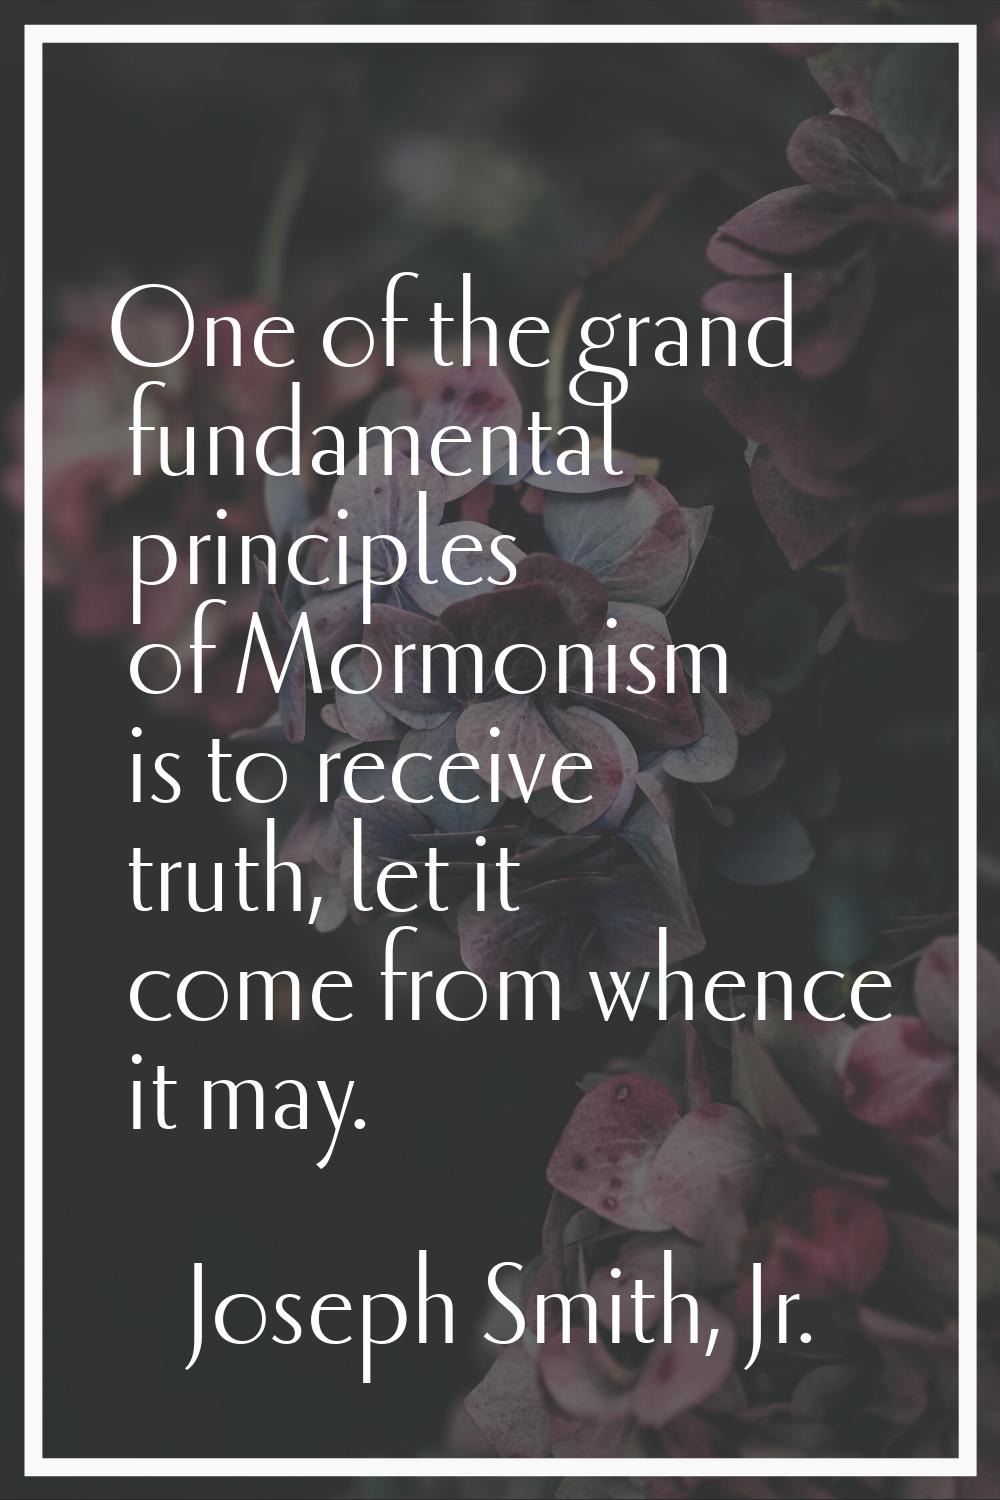 One of the grand fundamental principles of Mormonism is to receive truth, let it come from whence i